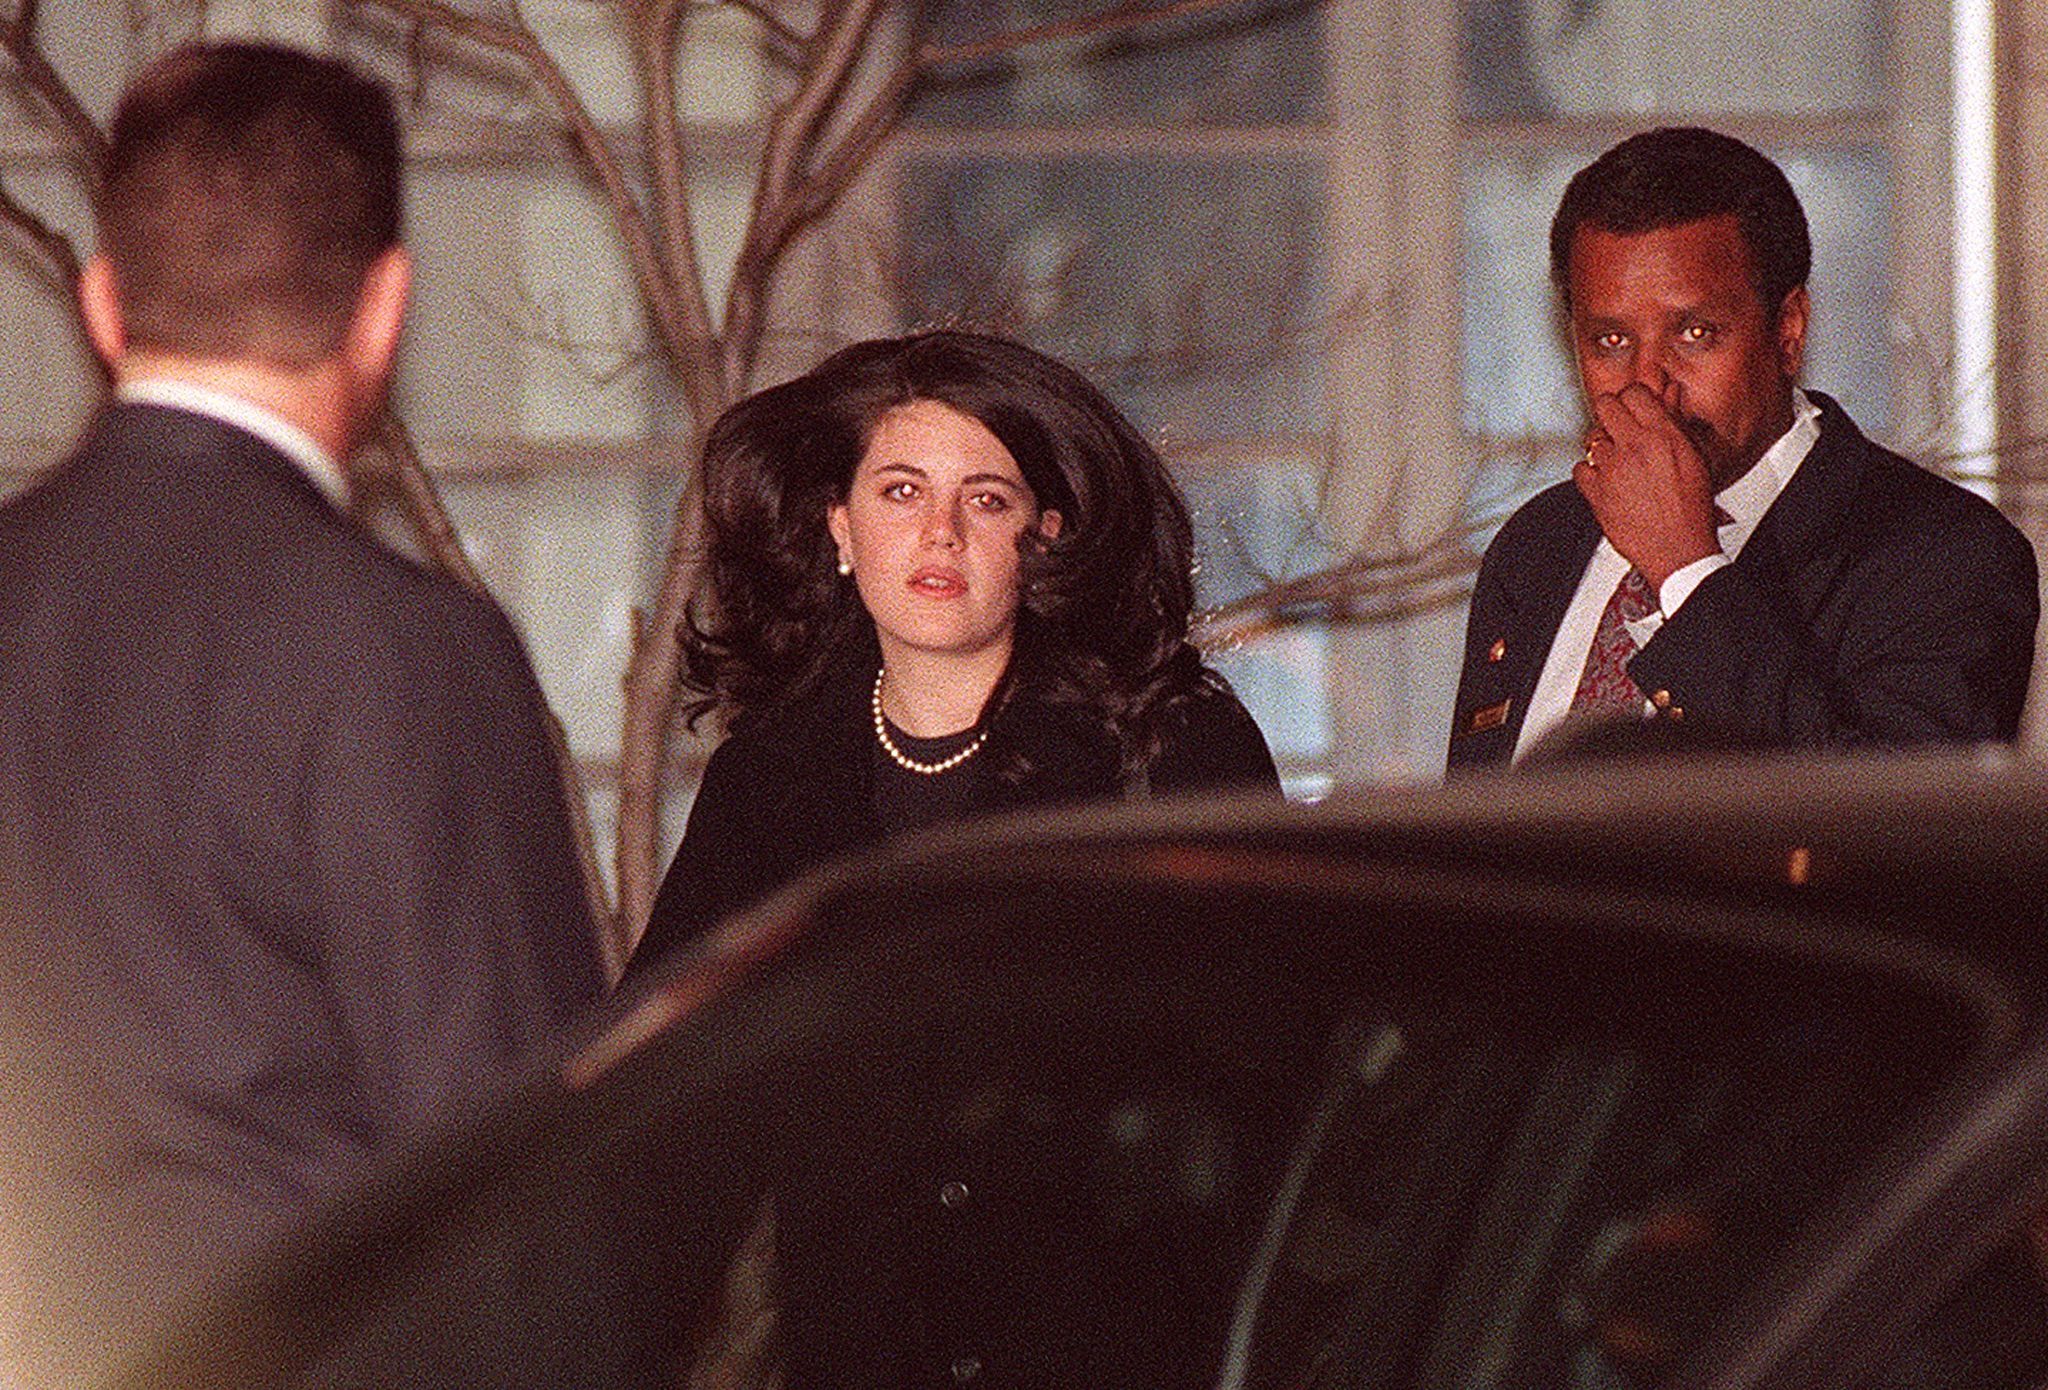 Monica Lewinsky (C) walks to a waiting car at the Cosmos Club on January 29, 1998 in Washington D.C. | Source: Getty Images